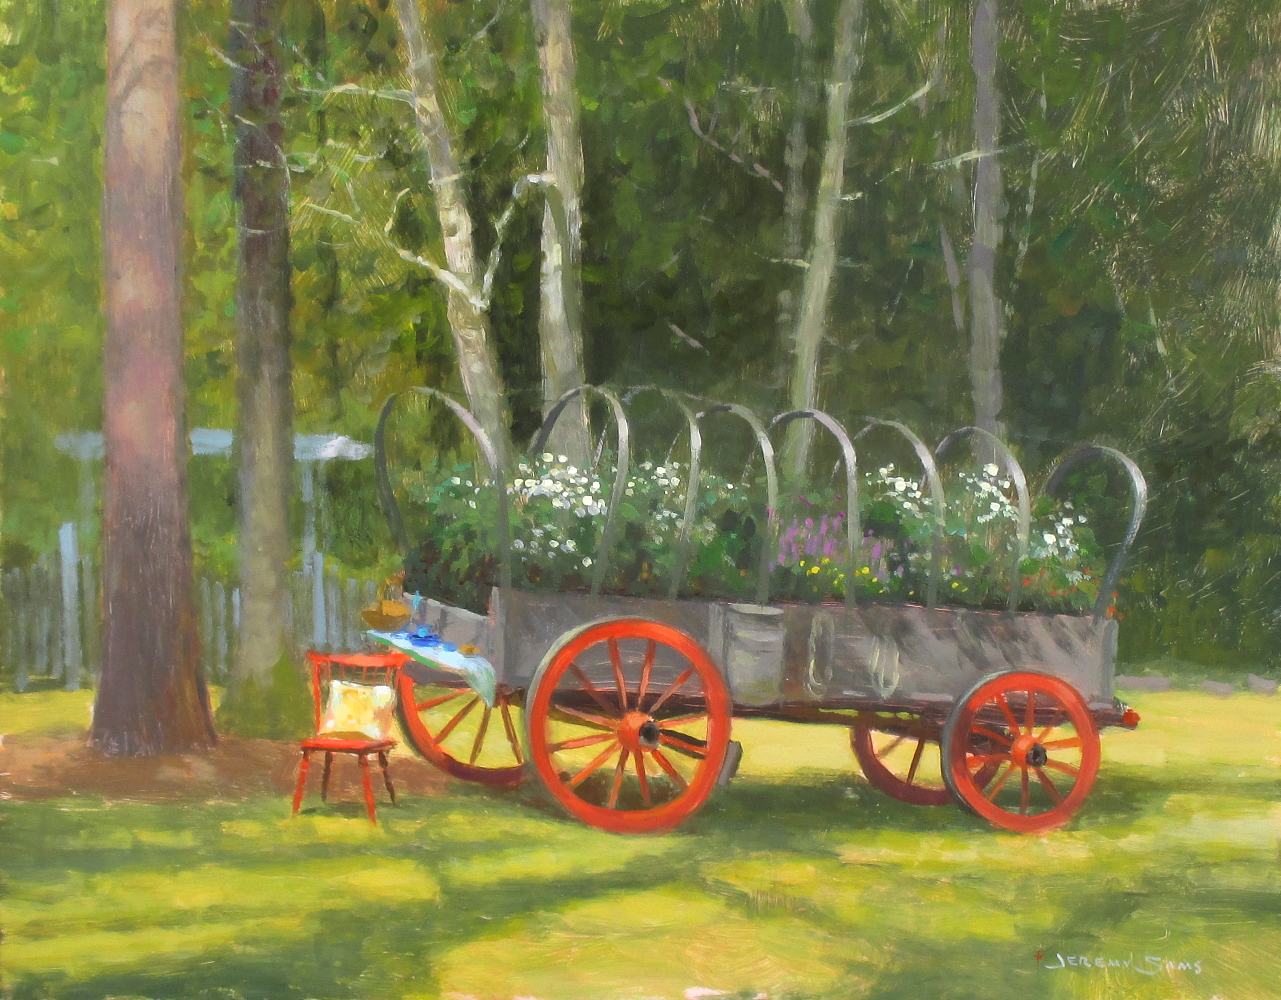 plein air painting in Wilmington, NC of wagon at the horse farm in garden club tour by North Carolina artist Jeremy Sams